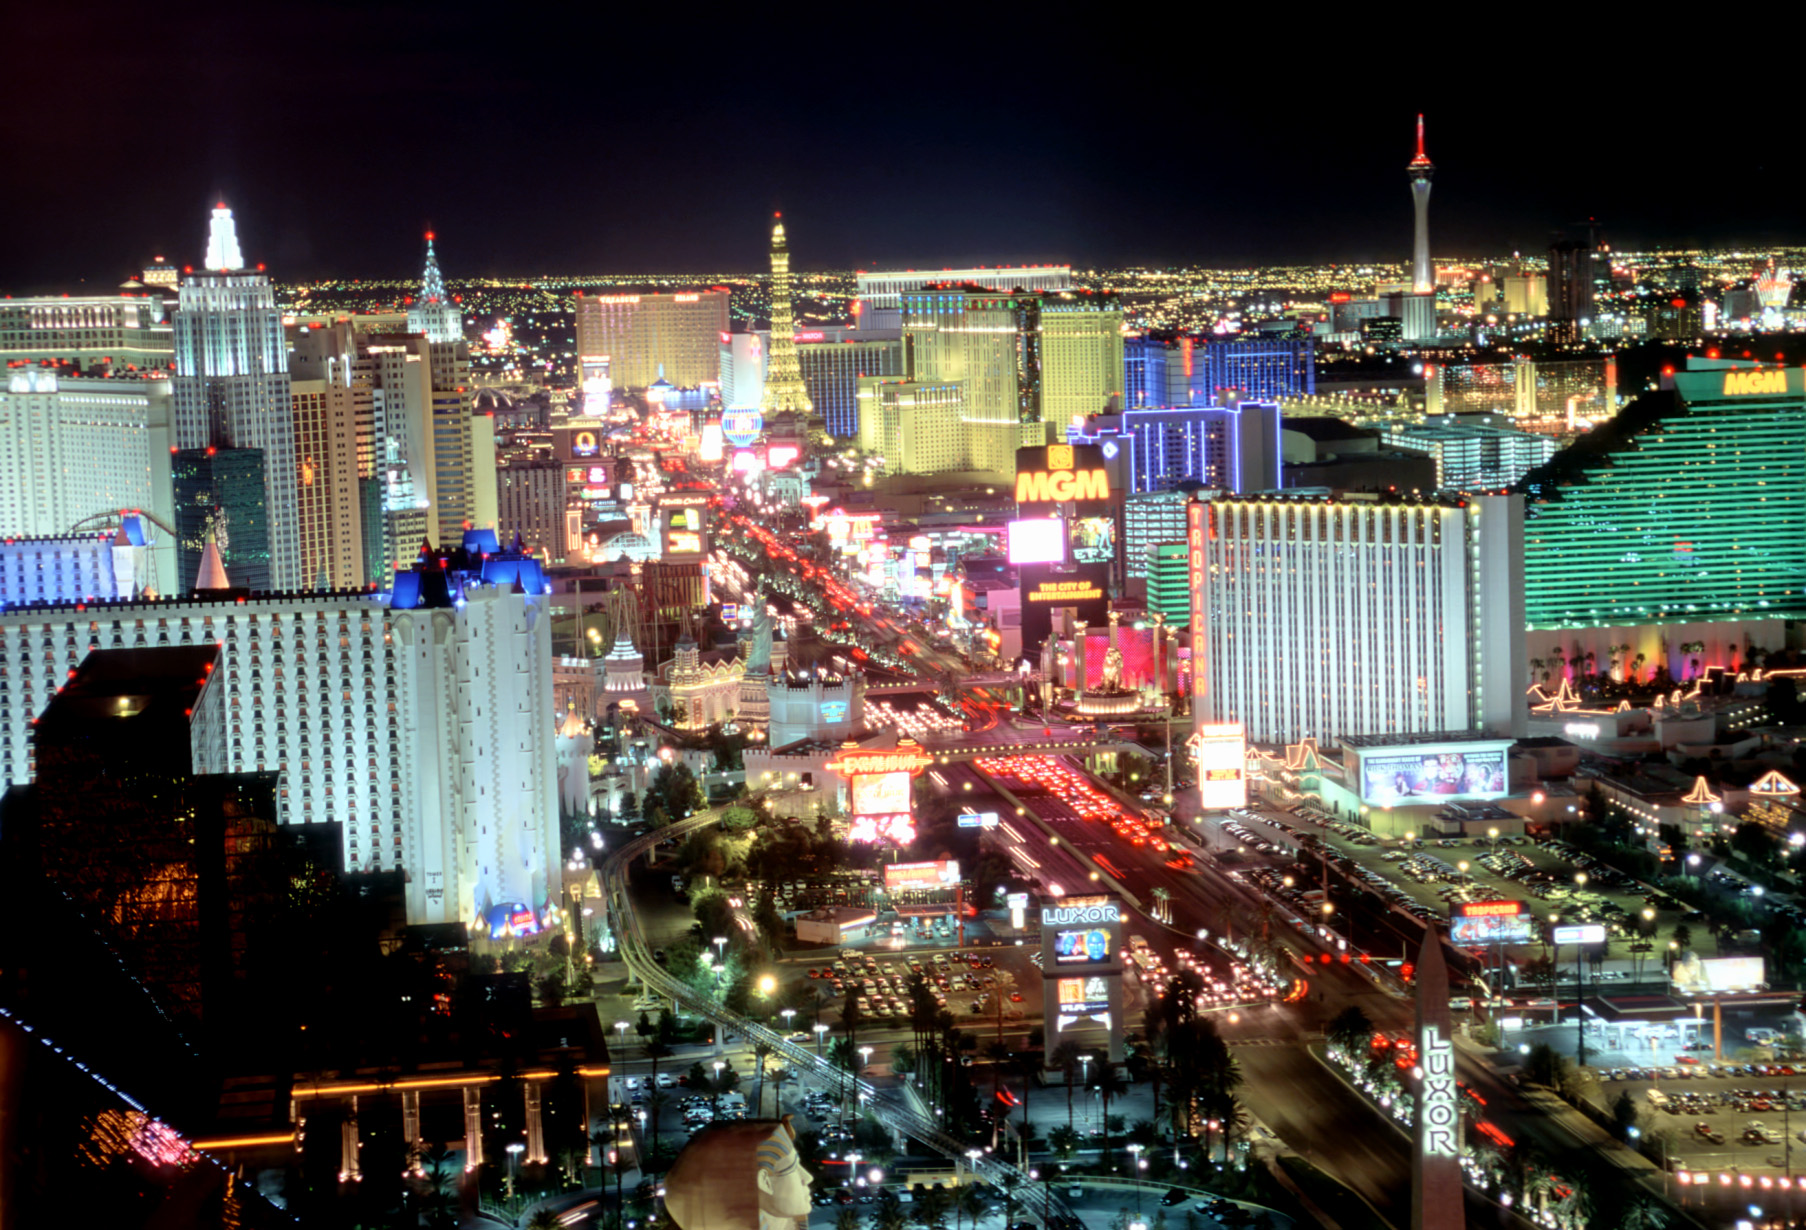 Daily Scheduled Shuttle Service To The Las Vegas Strip Or Airport